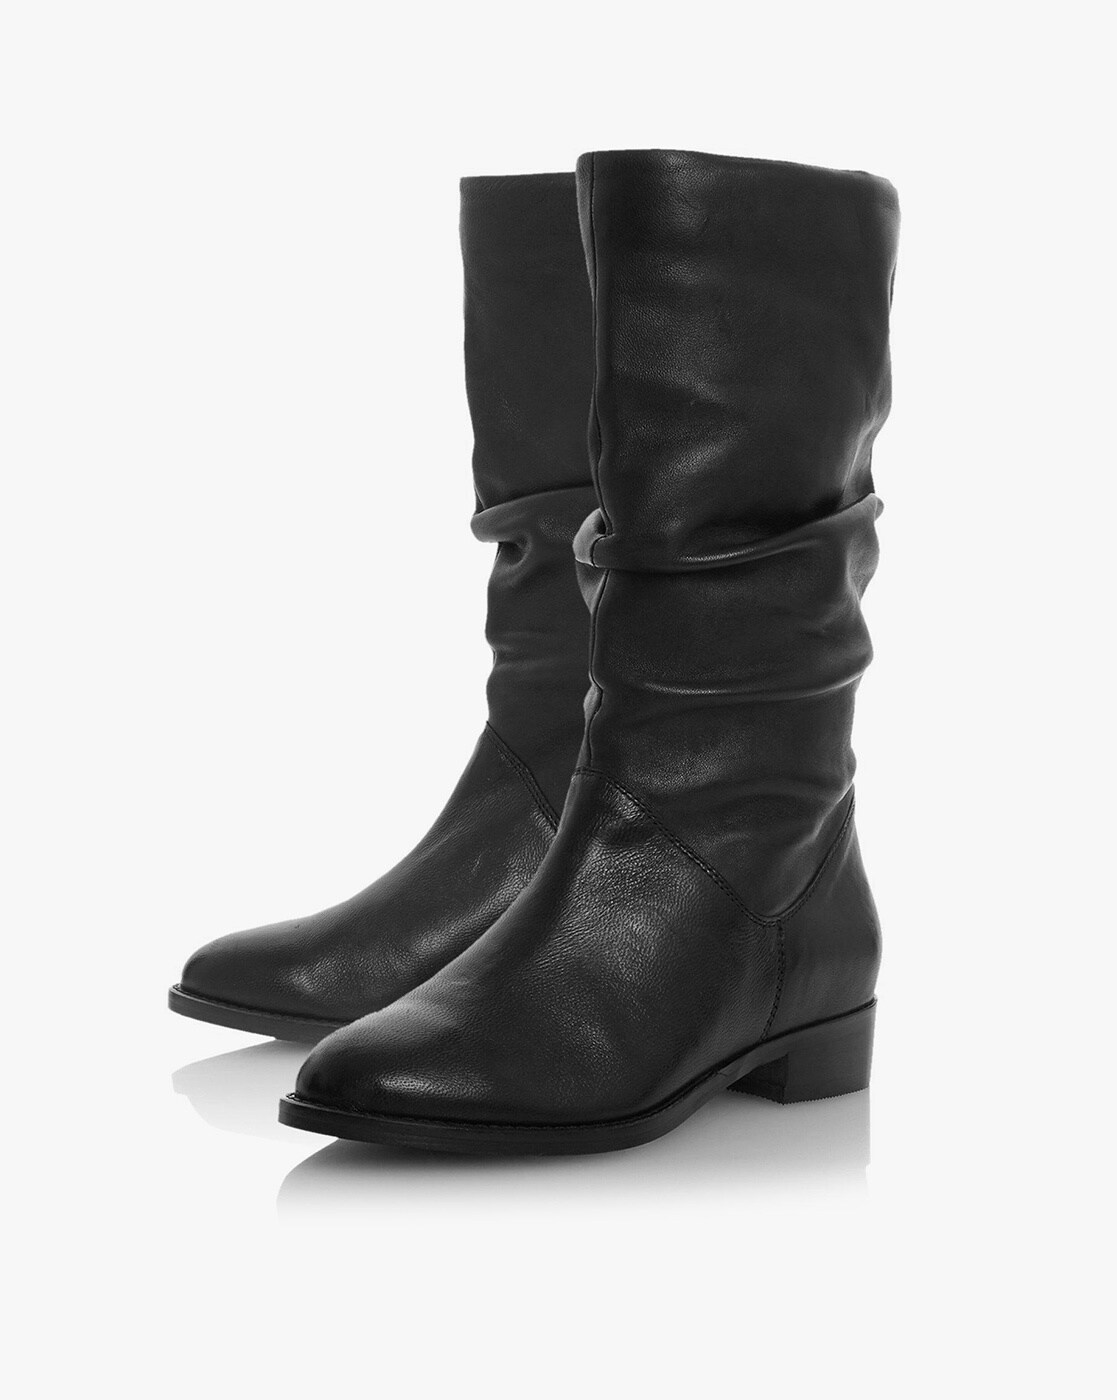 Black Boots for Women by Dune London 